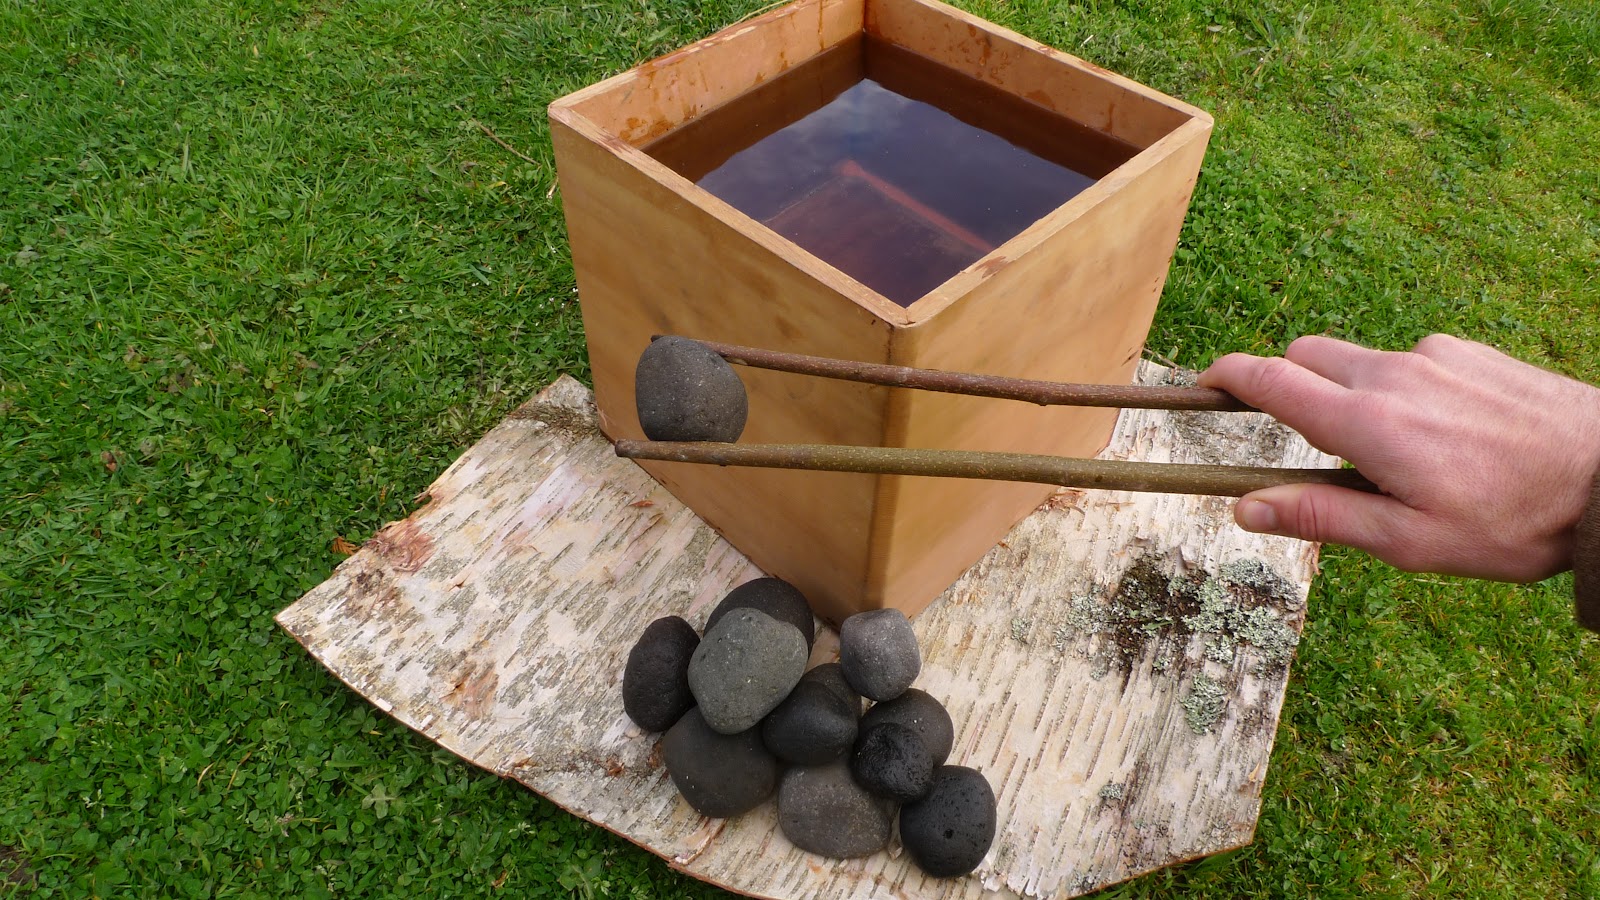 Wild Harvests: Cooking in a Bentwood Box